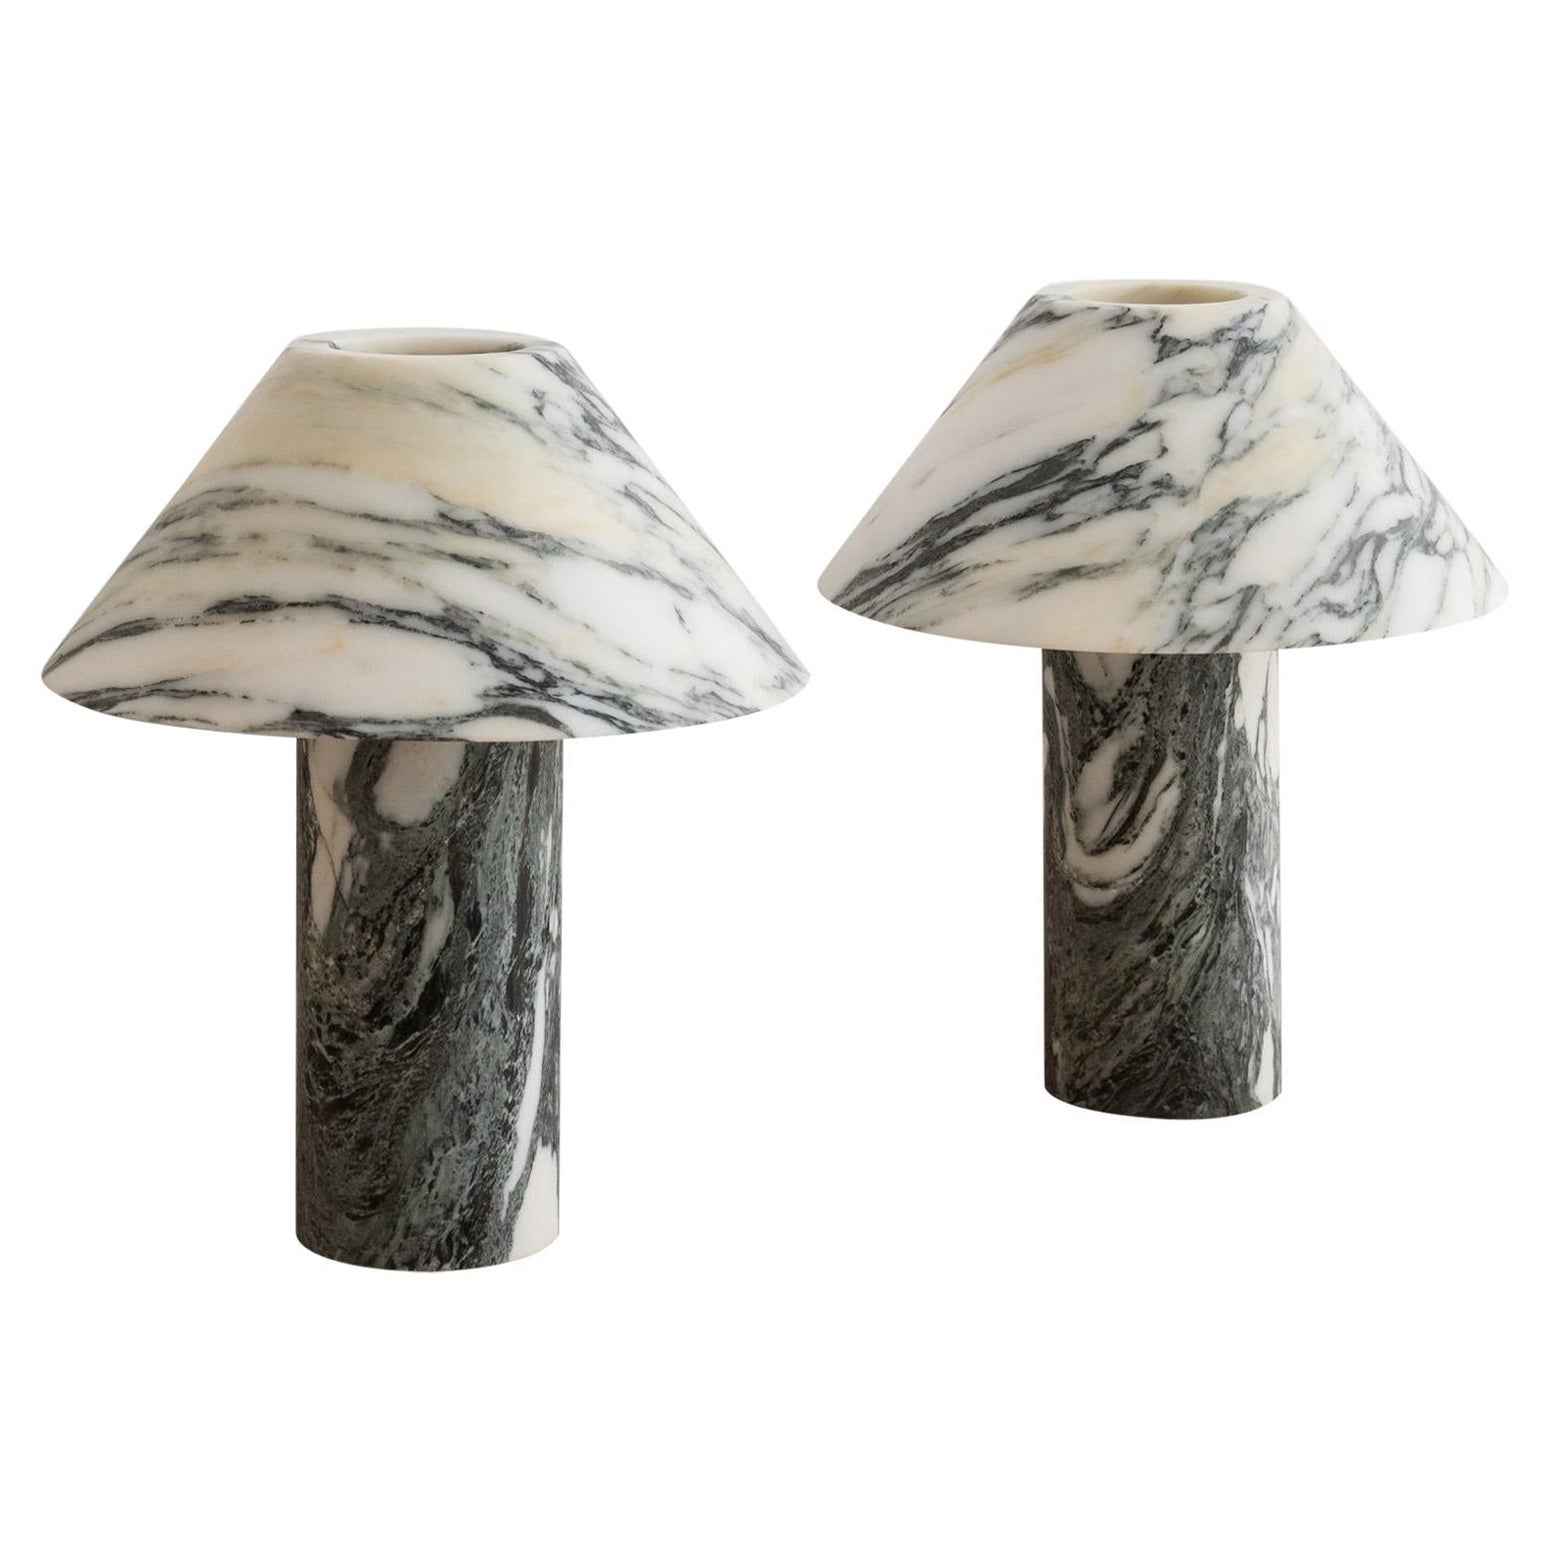 Set of 2 Large Arabescato Pillar Lamps by Henry Wilson For Sale